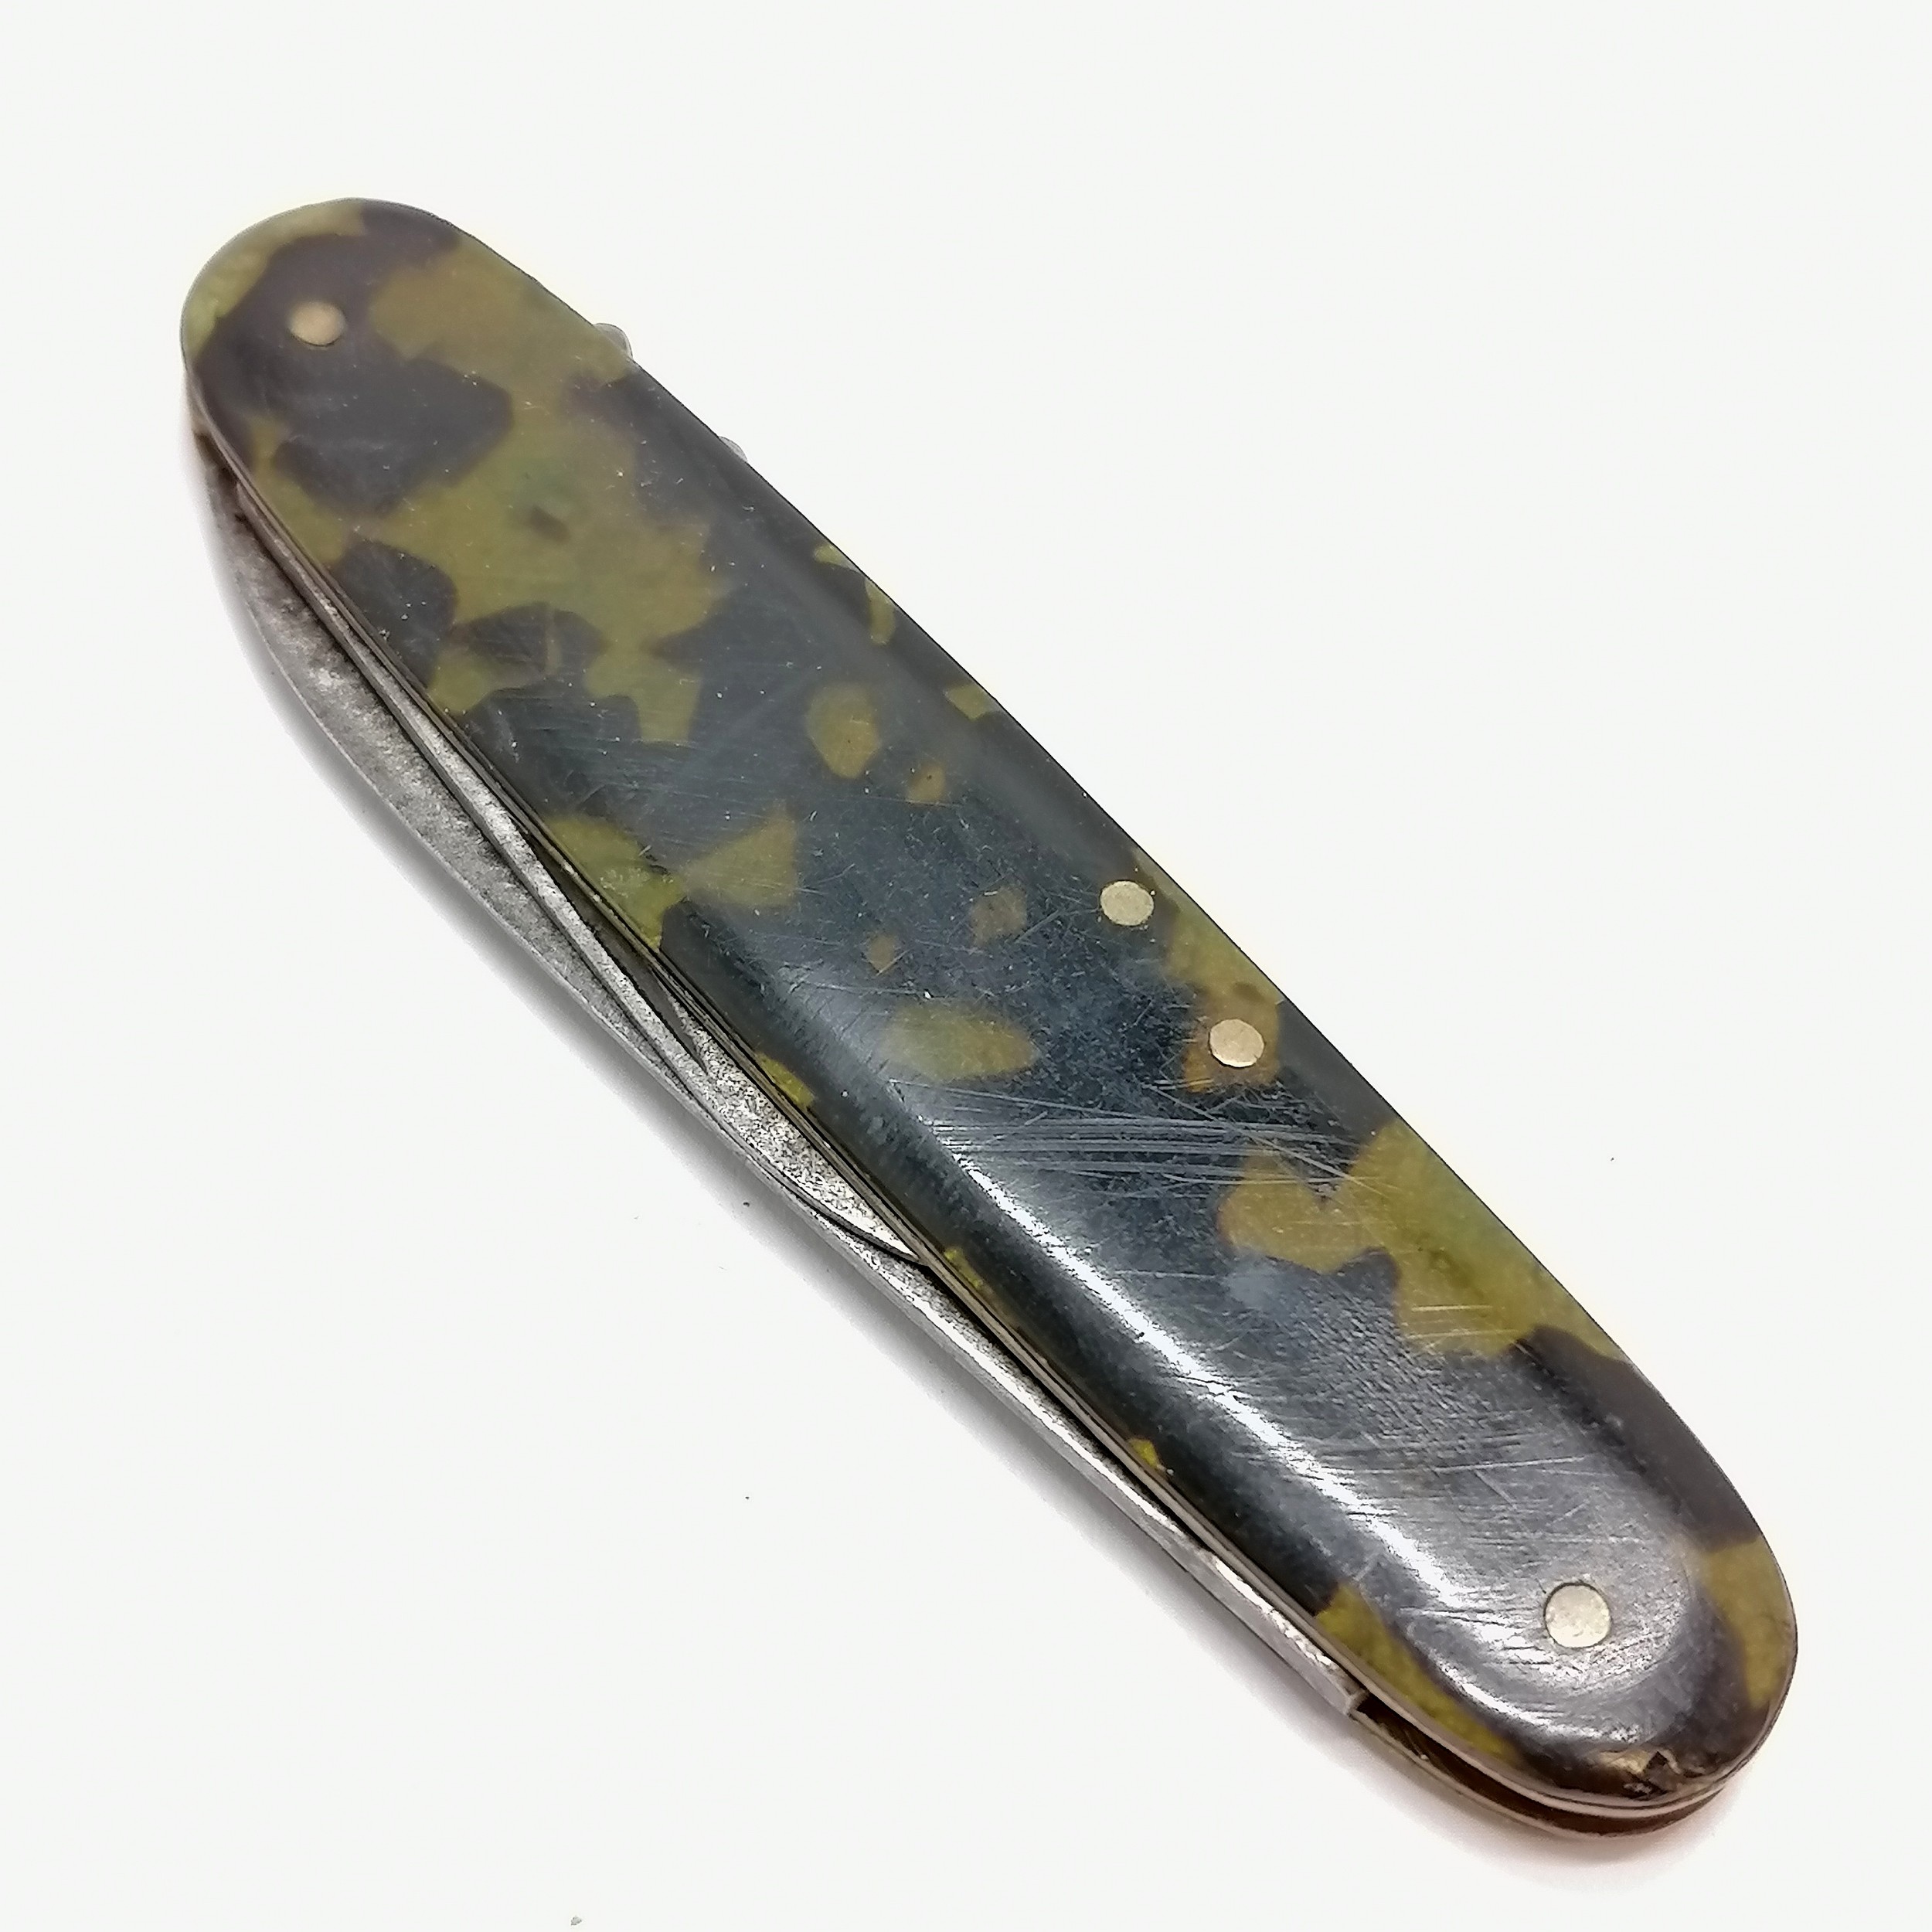 Unusual doubled bladed penknife with corkscrew & faux tortoiseshell panels - total length 20cm ~ - Image 3 of 4